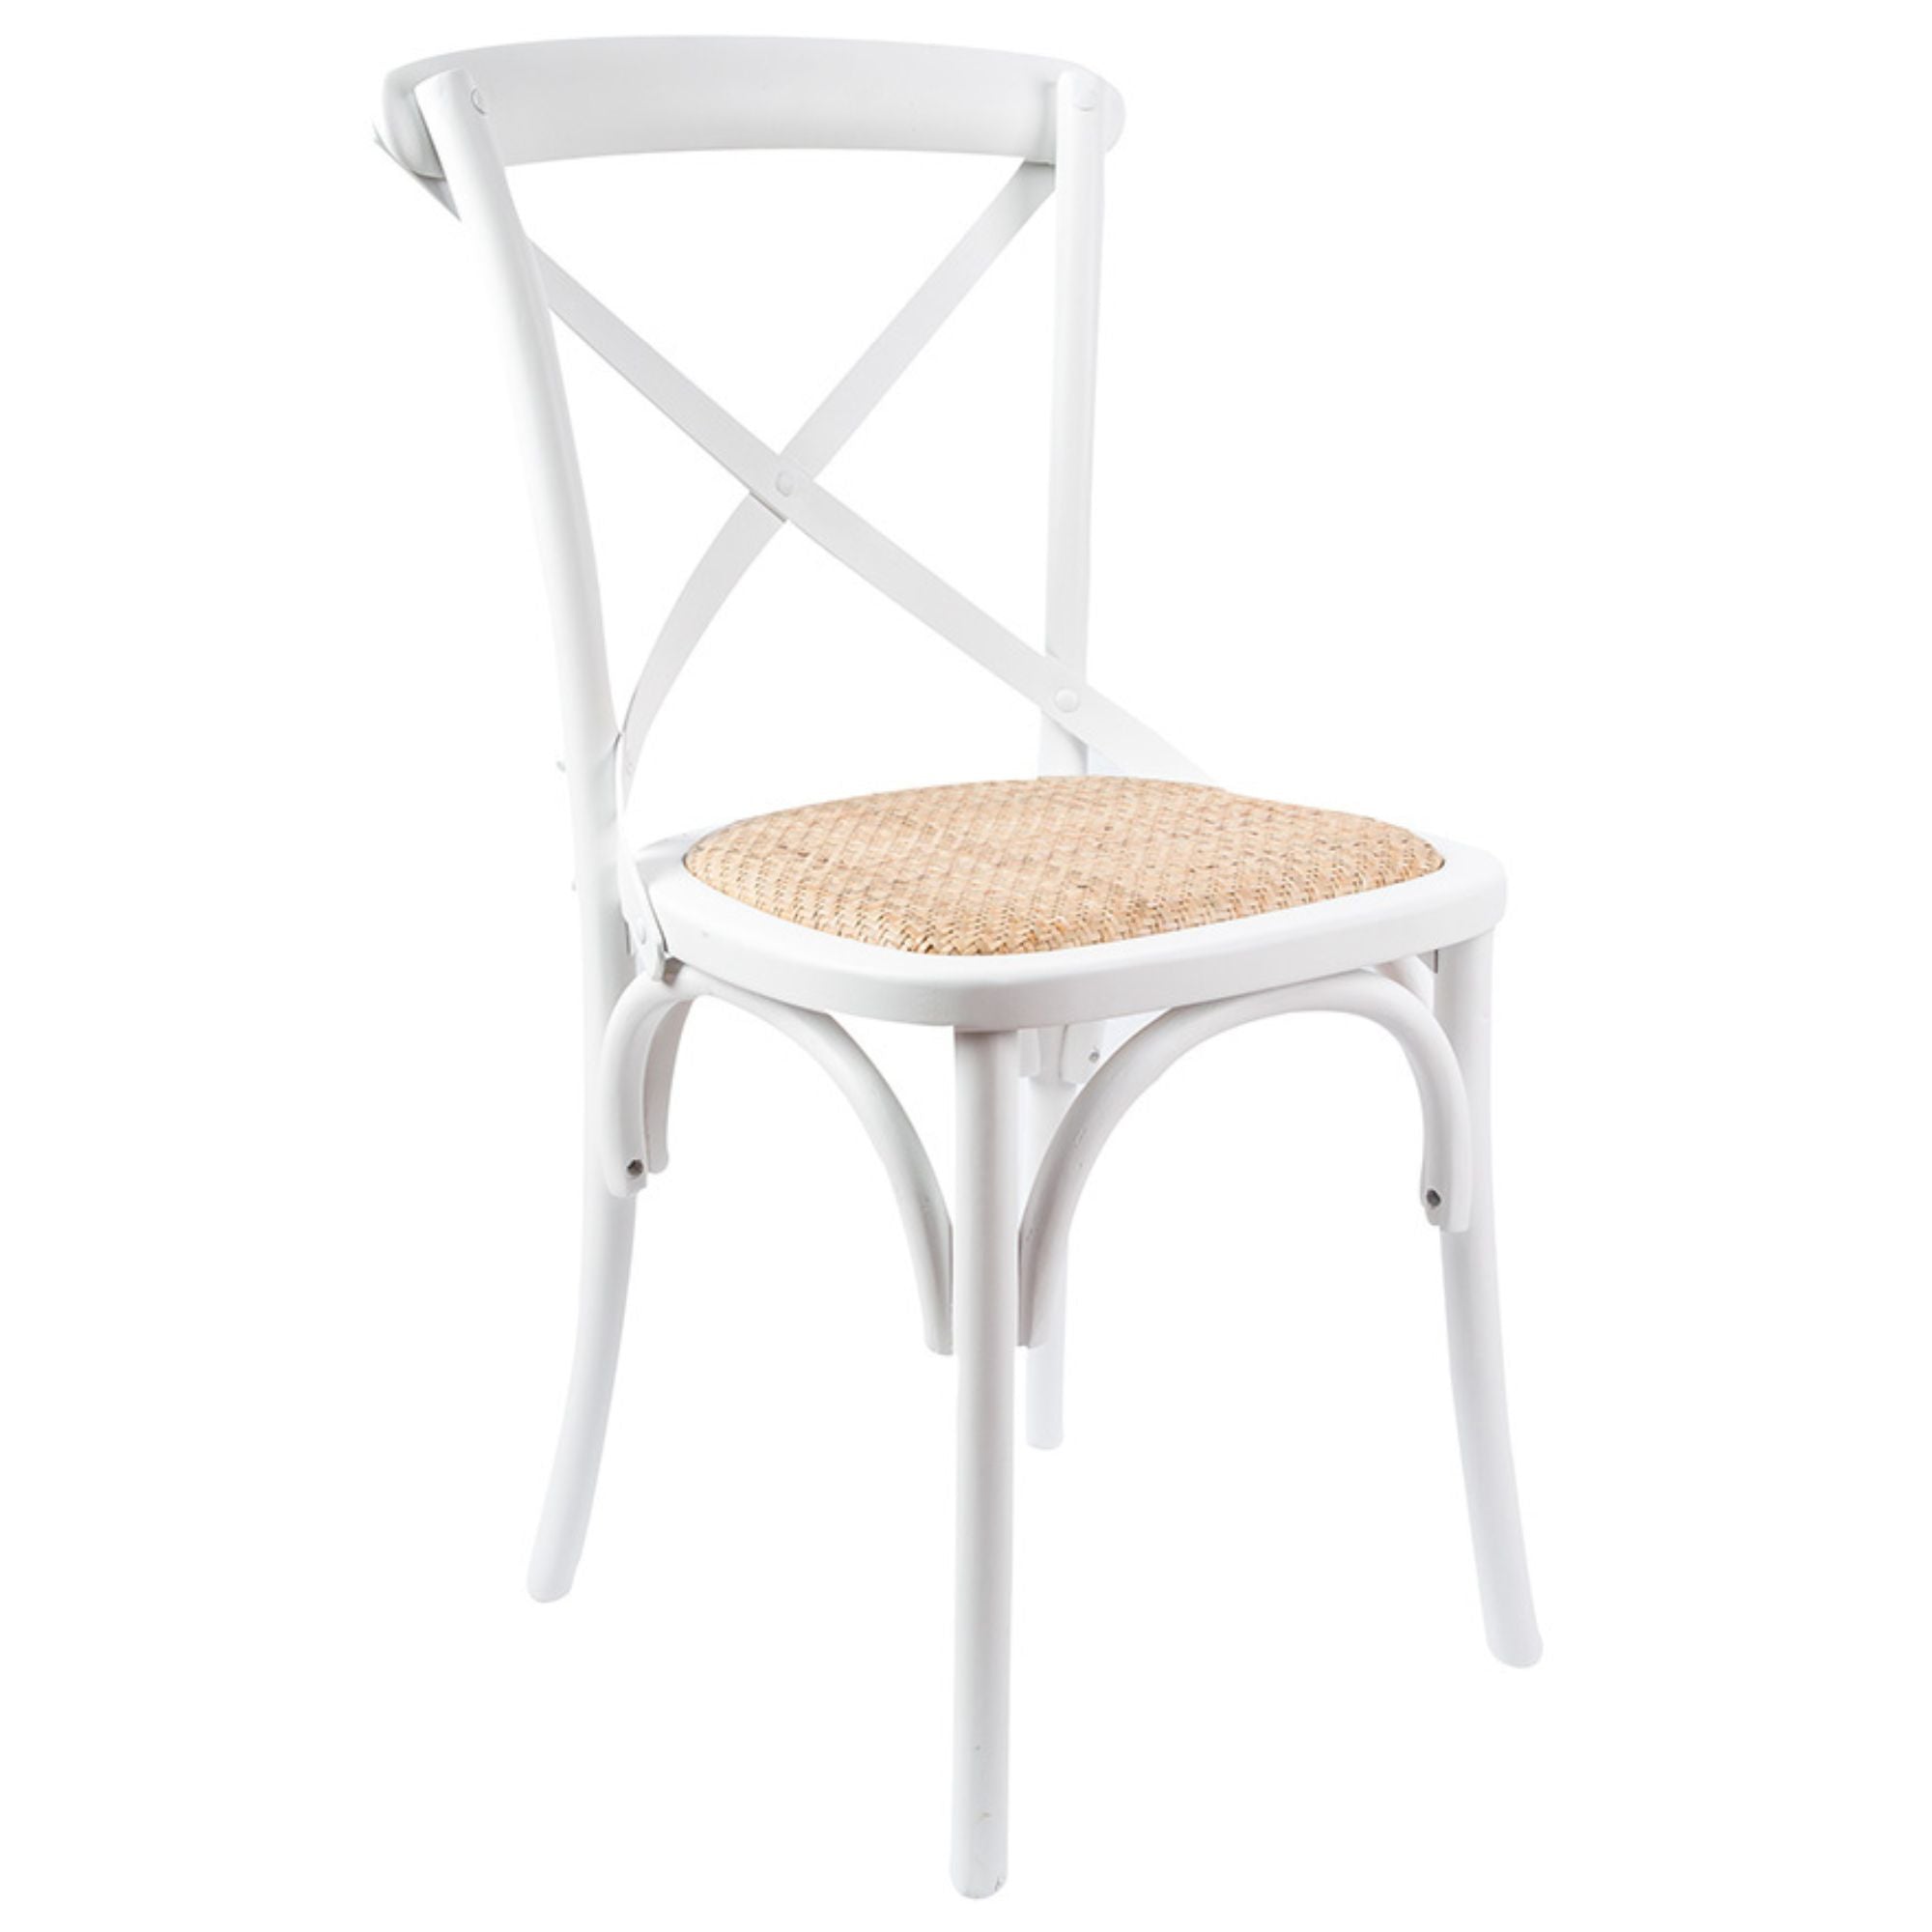 Aster Crossback Dining Chair Set of 2 Solid Birch Timber Wood Ratan Seat - White